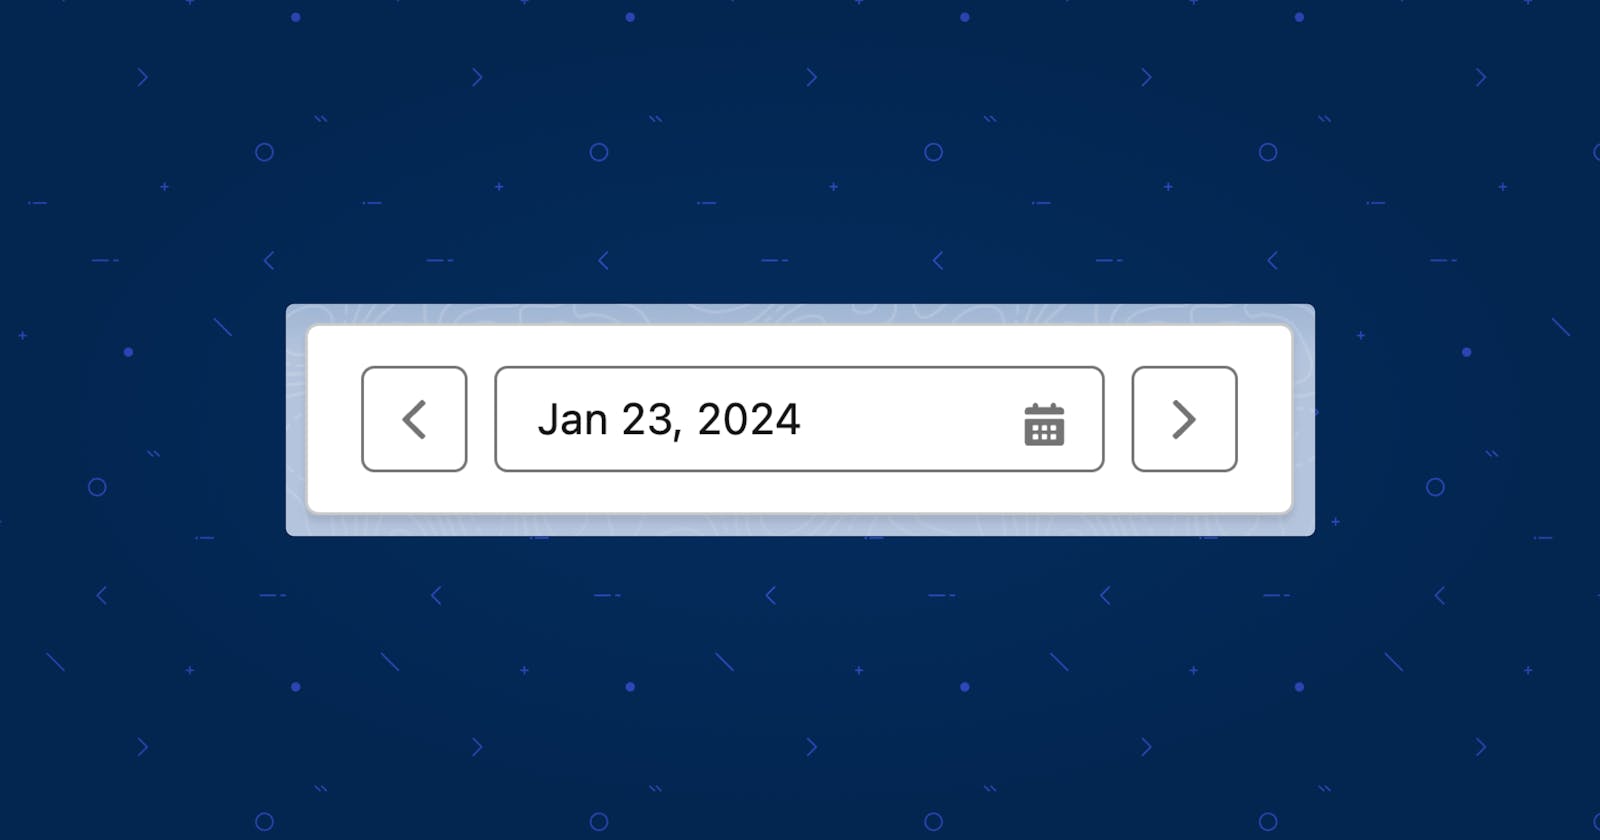 Date Picker With Navigation Arrows on Left & Right in Lightning Web Components (LWC)